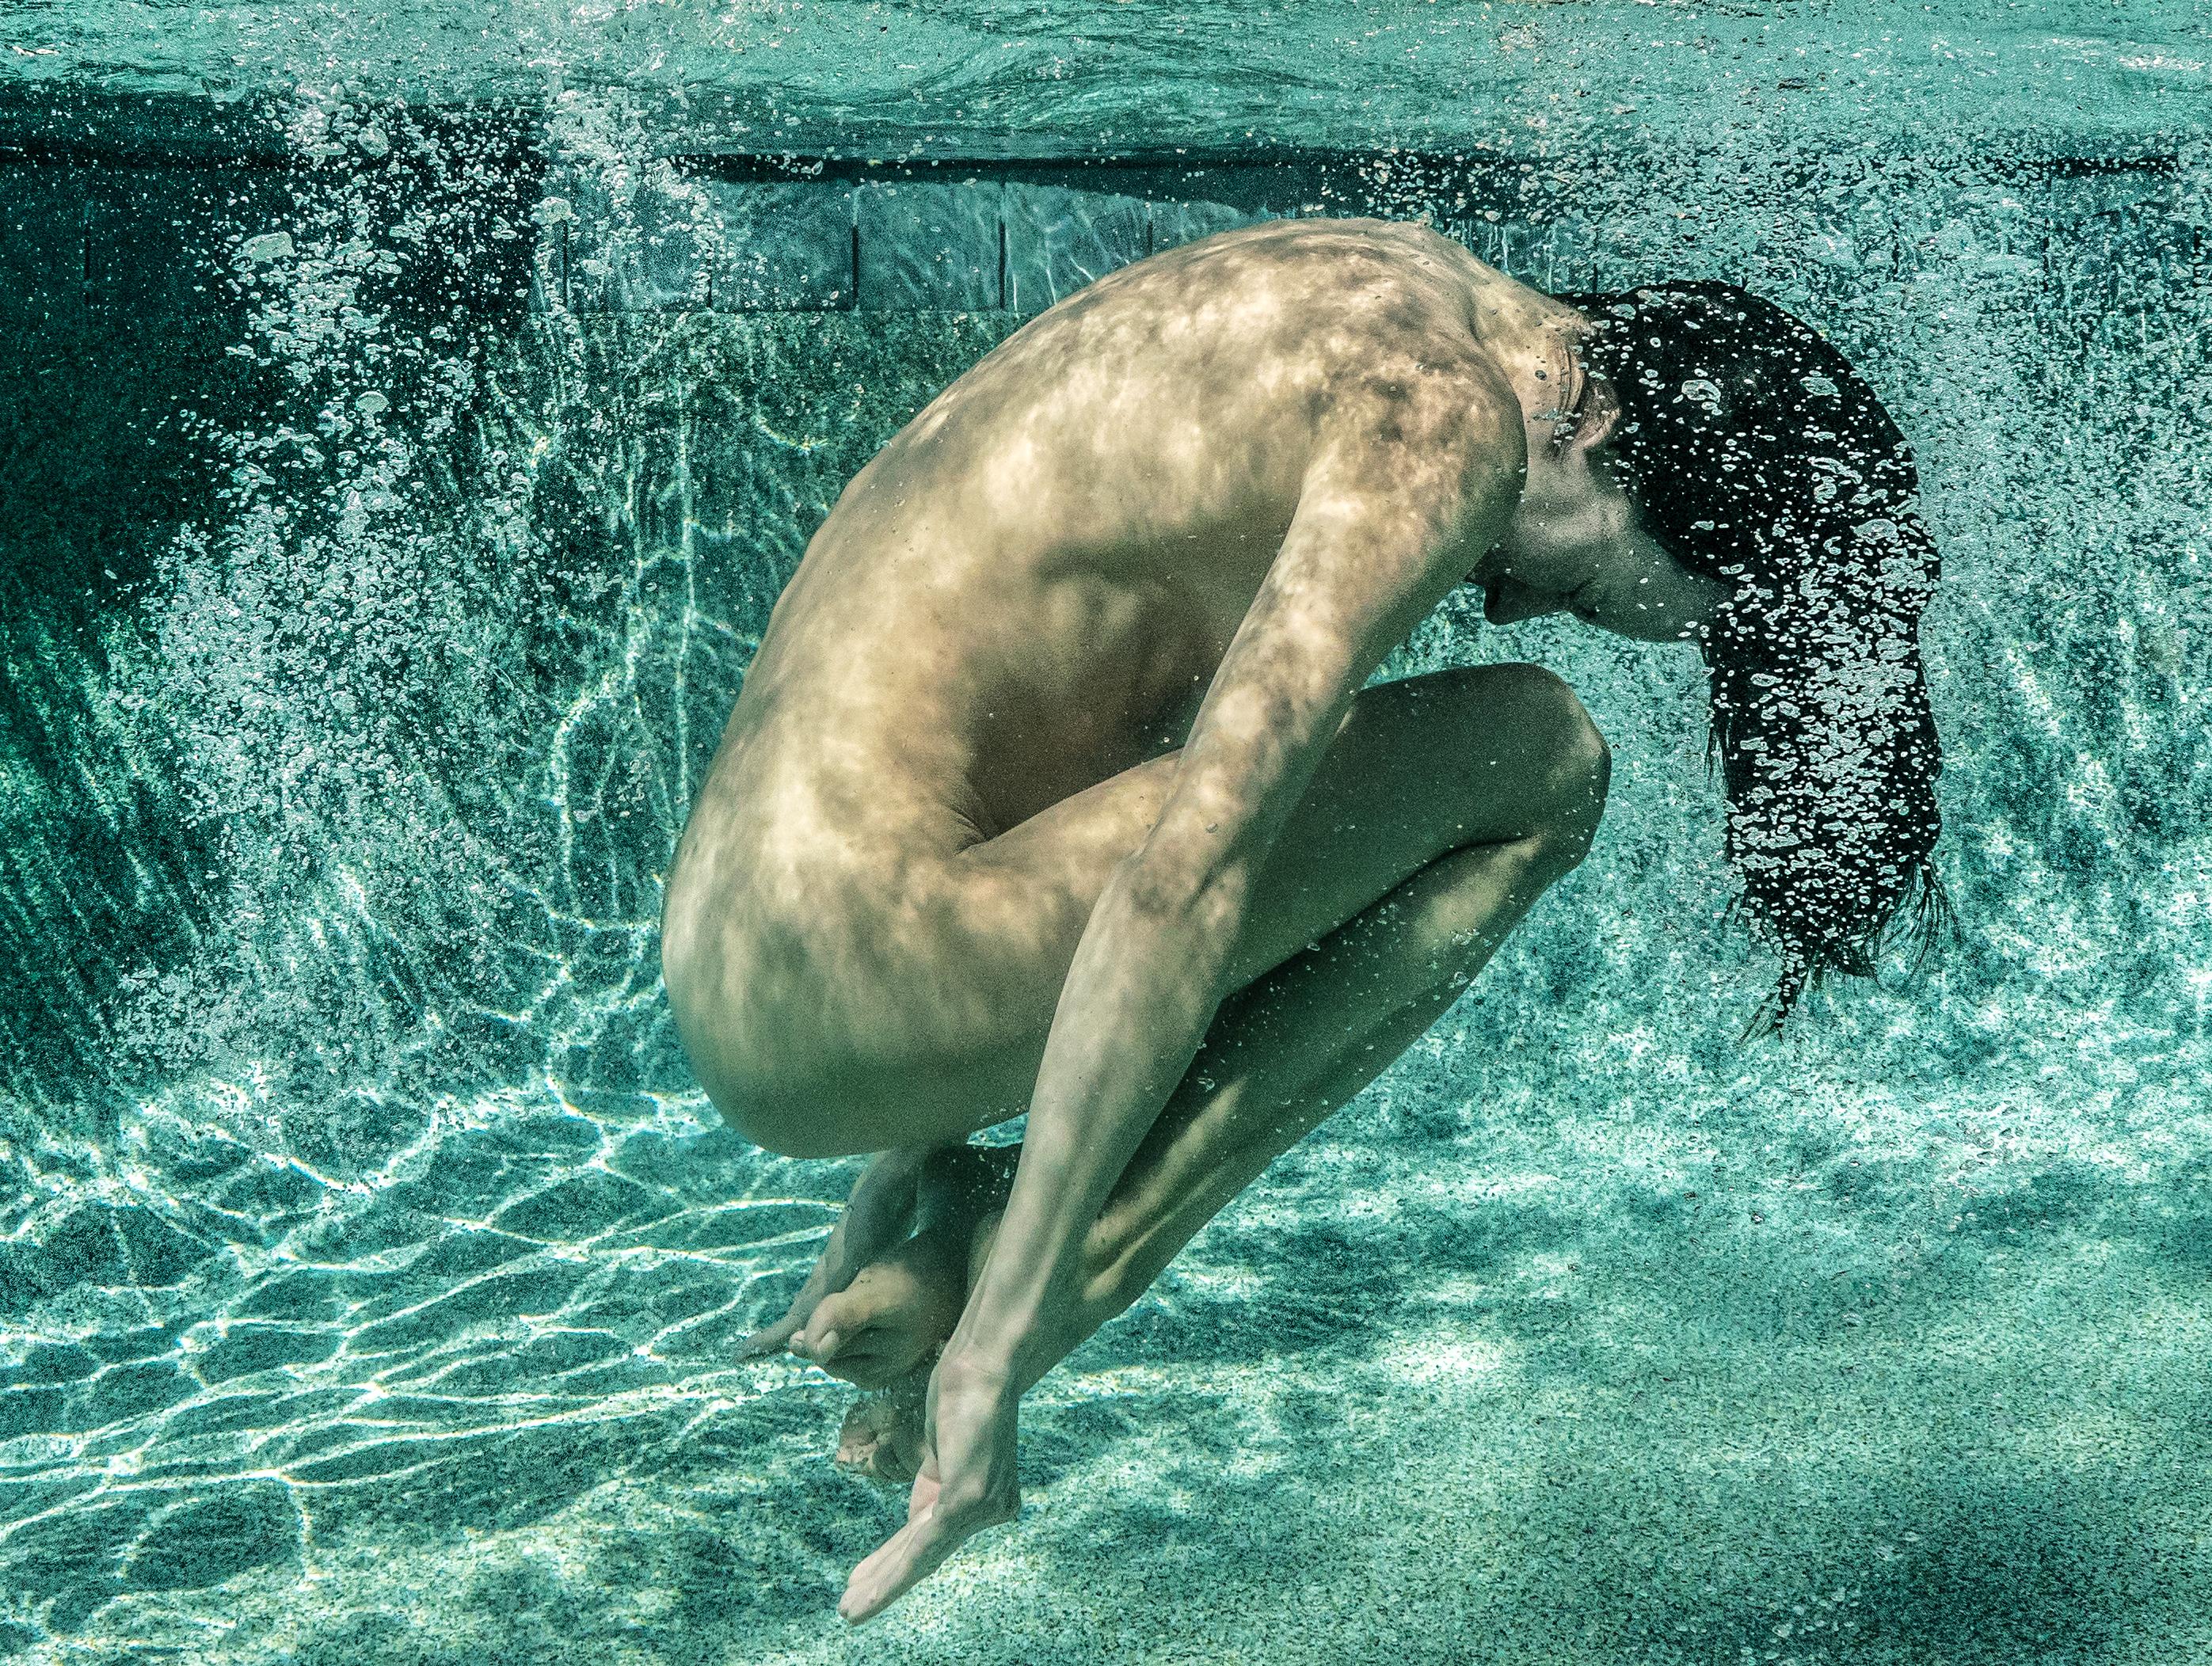 Green Roll III  - underwater nude photograph - print on aluminum - Photograph by Alex Sher